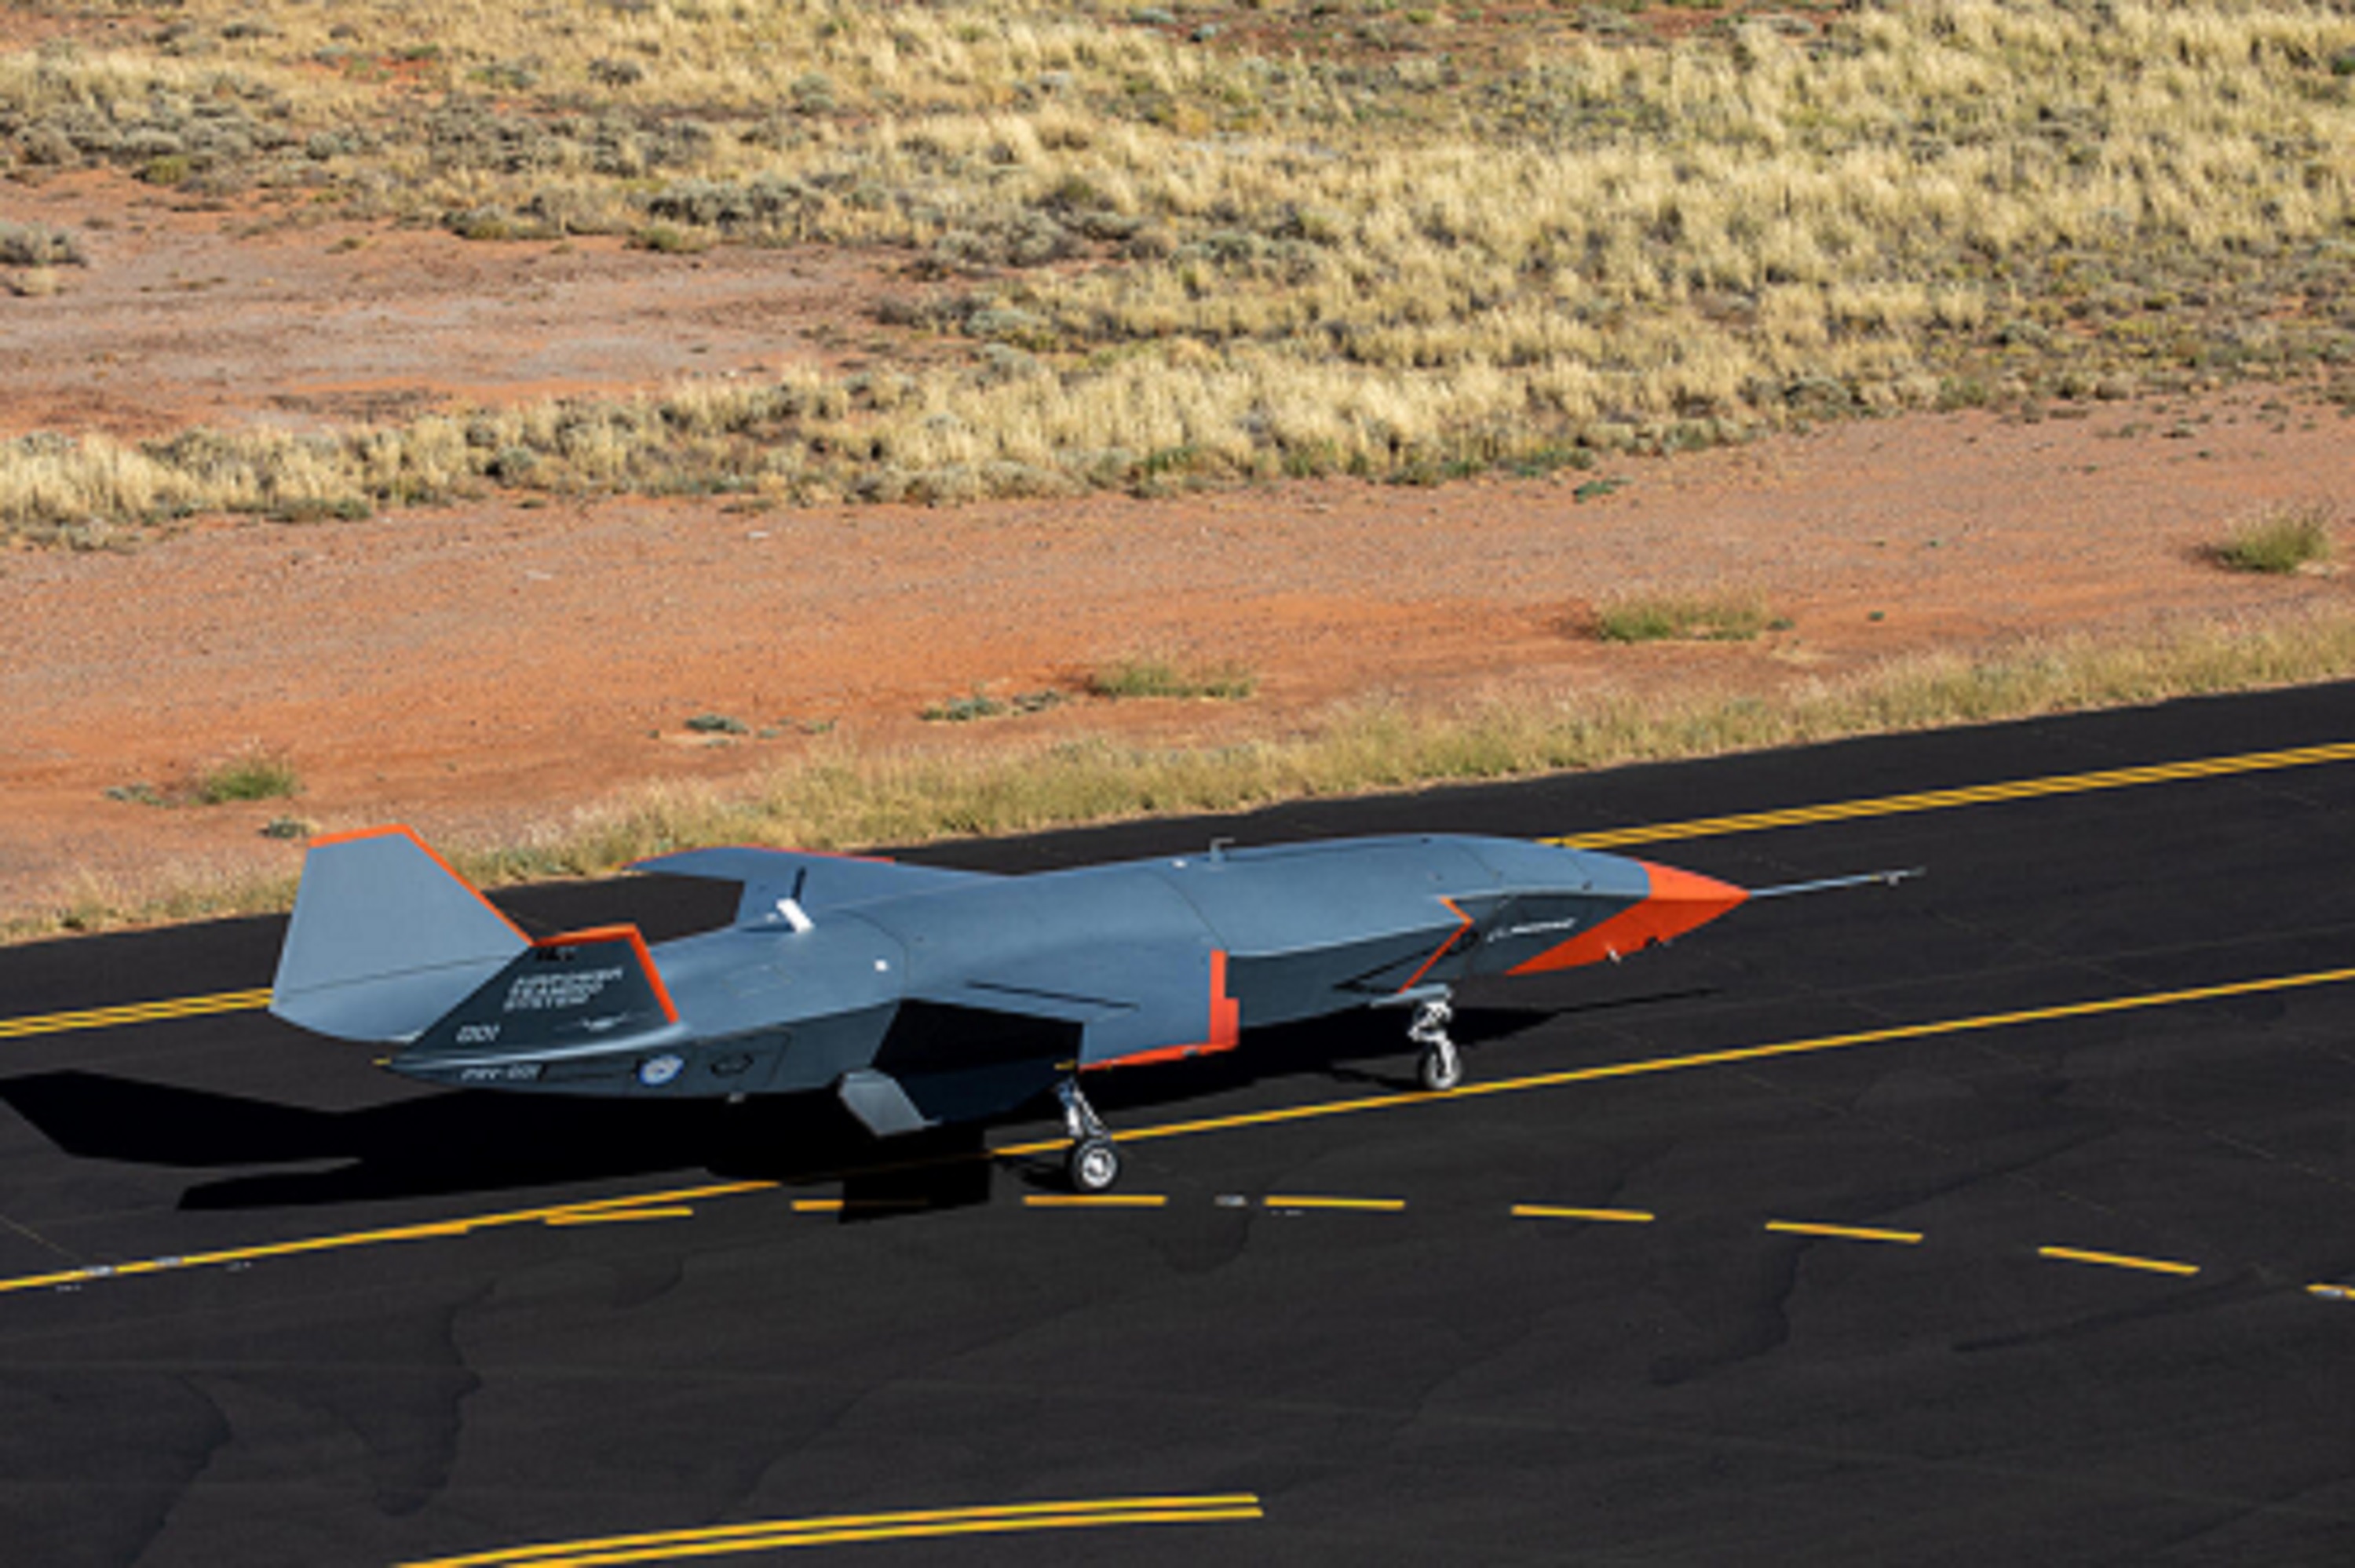 Boeing Australia Loyal Wingman Stealth UCAV Conducts First High-Speed Taxi Test